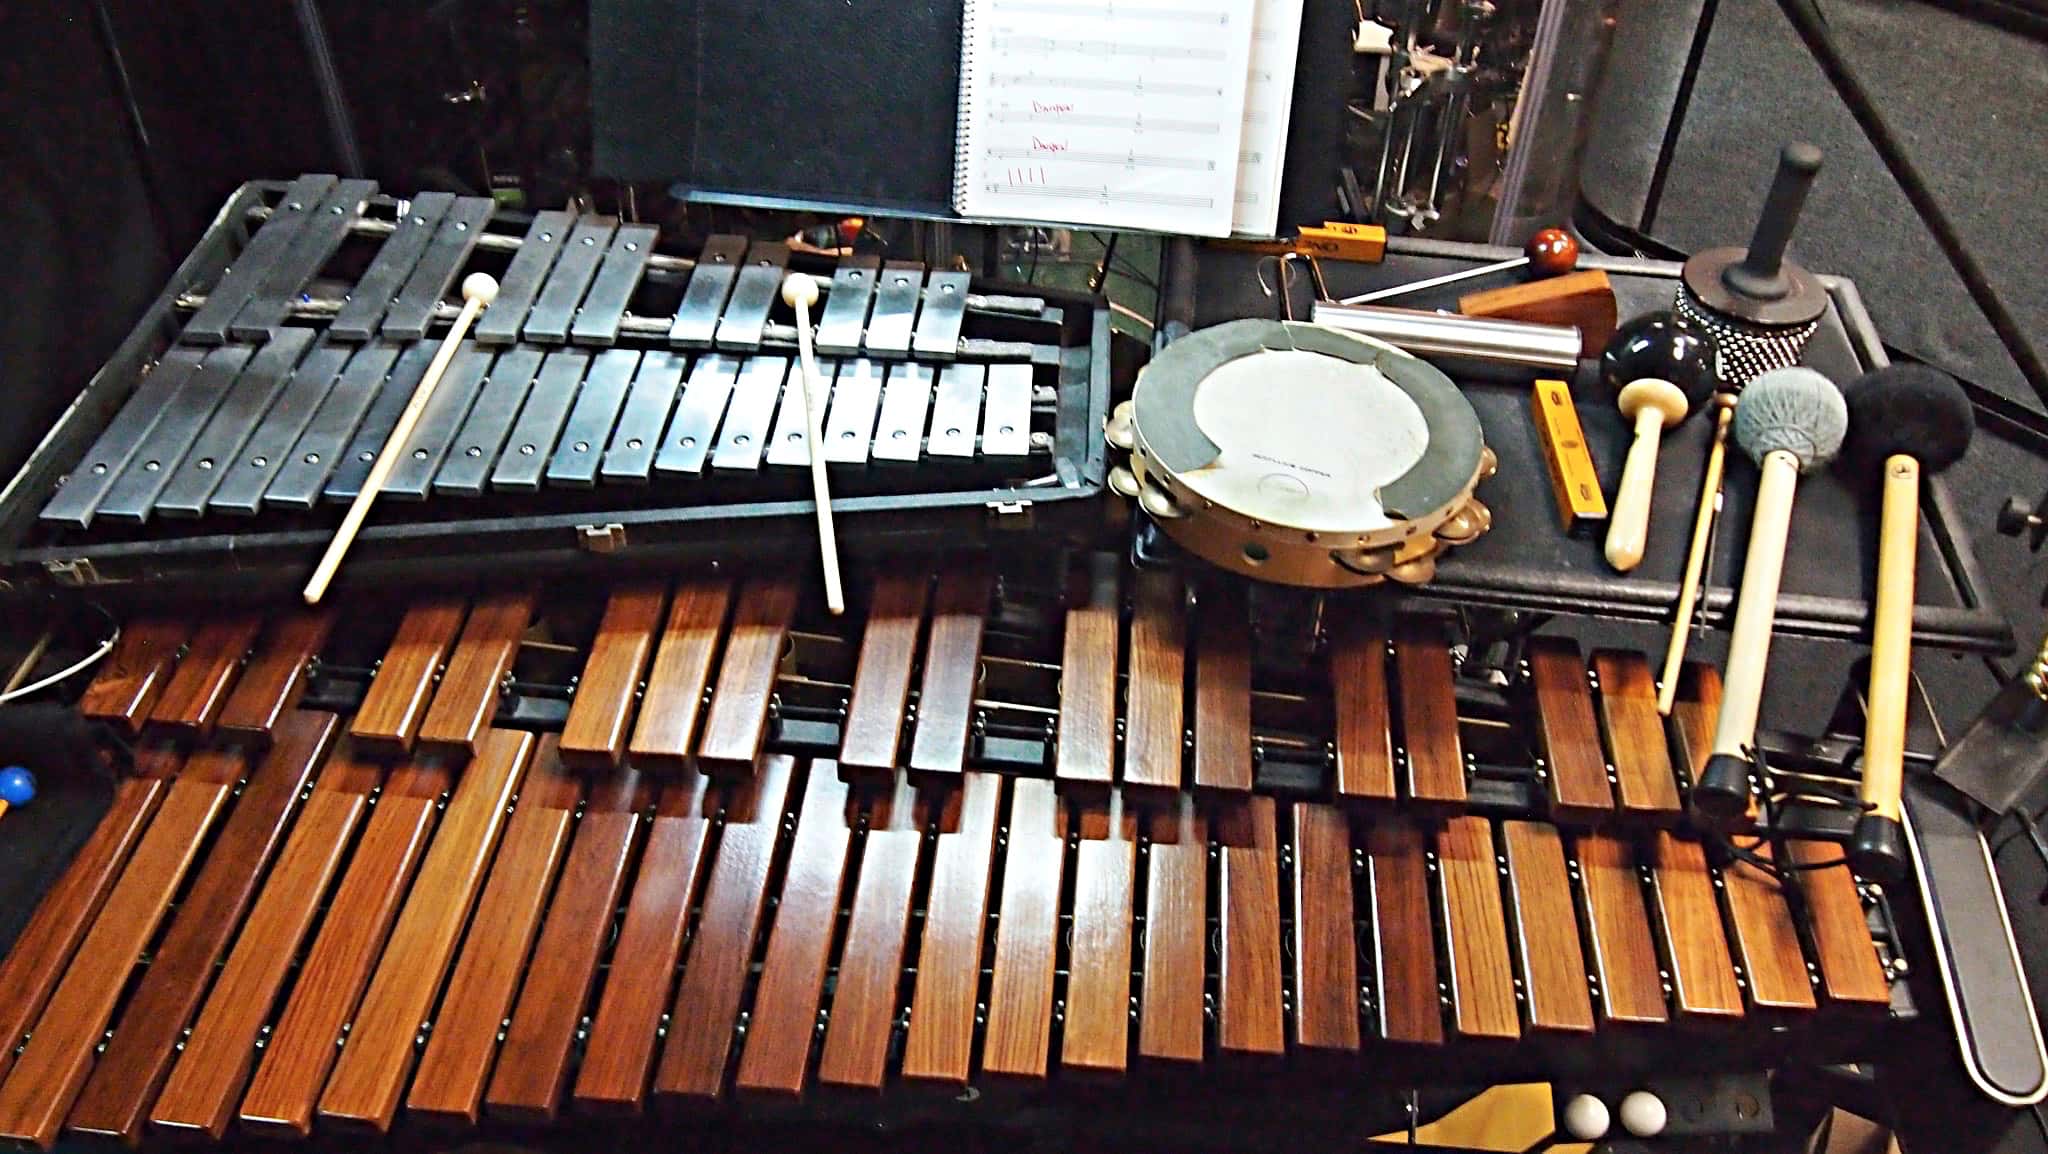 Dave Roth’s percussion setup for the Broadway revival of Cats at the Neil Simon Theatre.